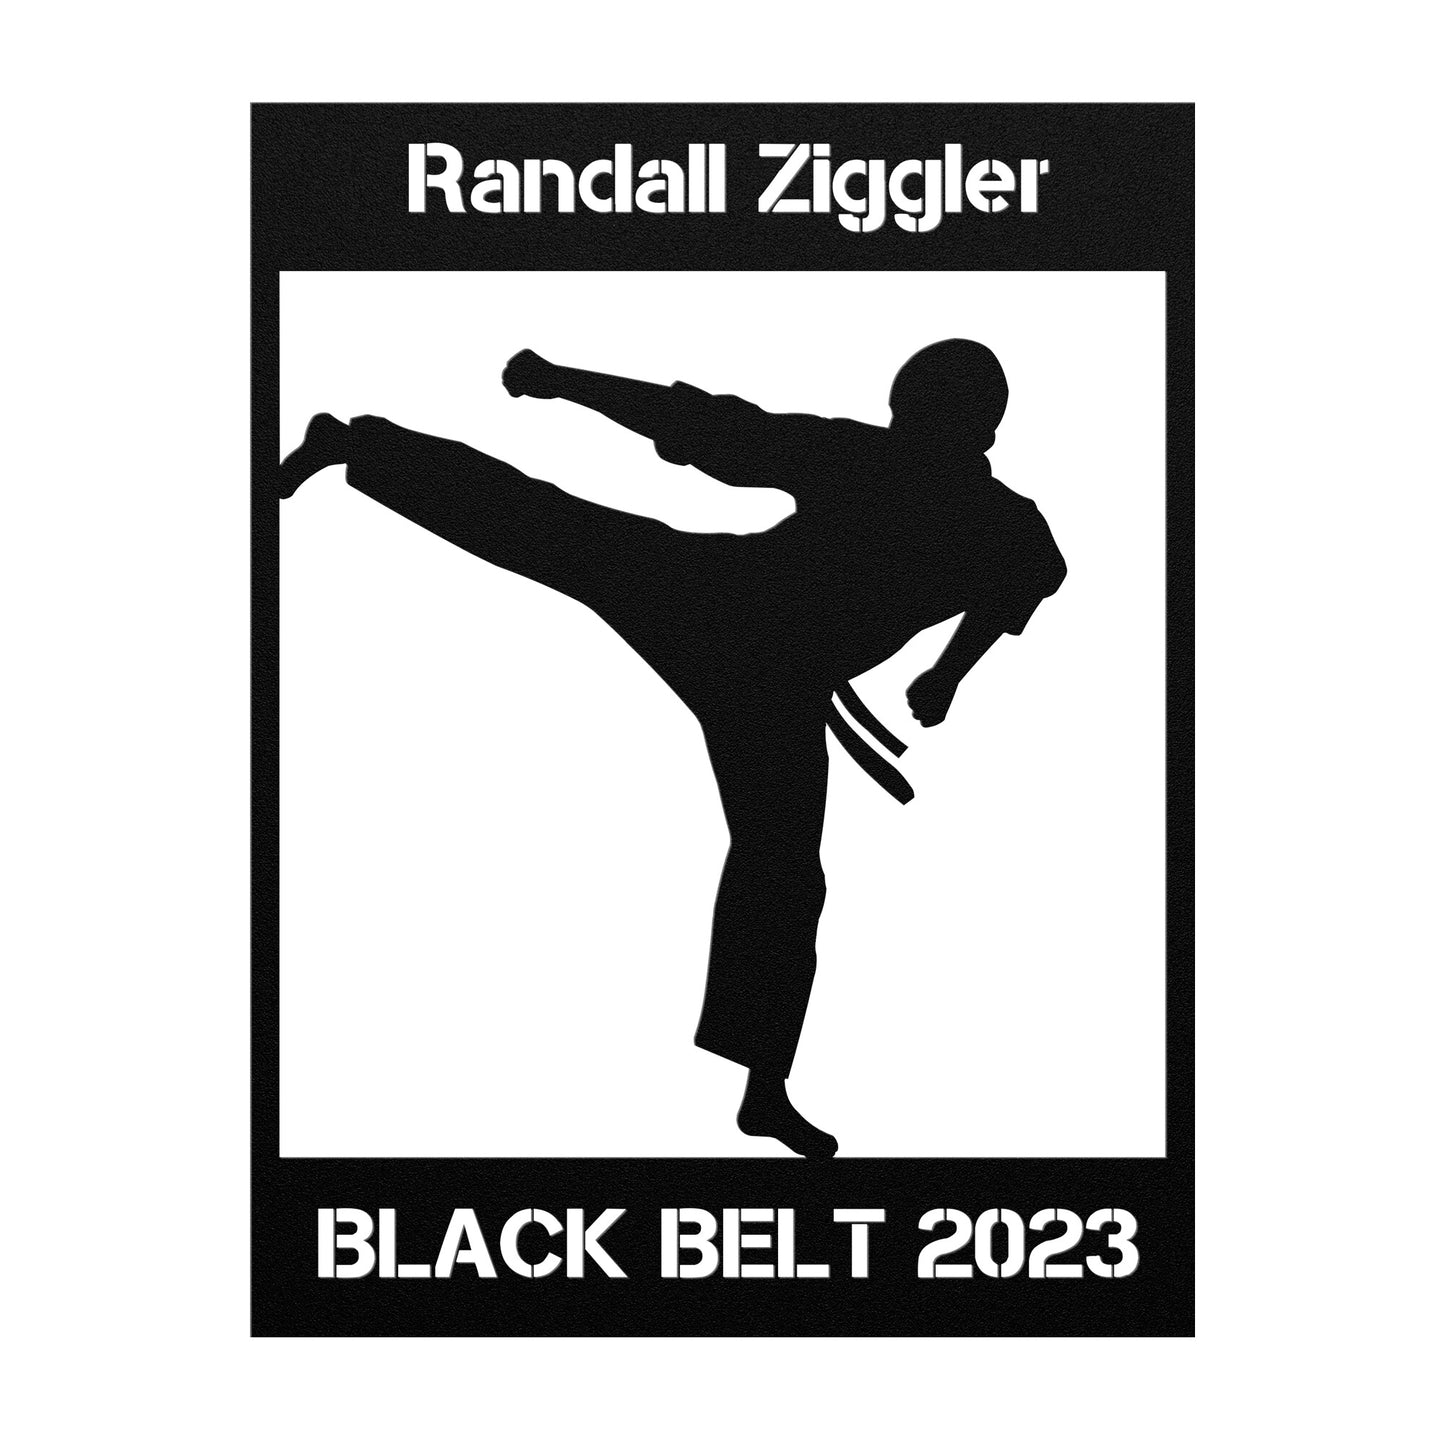 Personalized Martial Arts Boy Metal Wall Art Poster